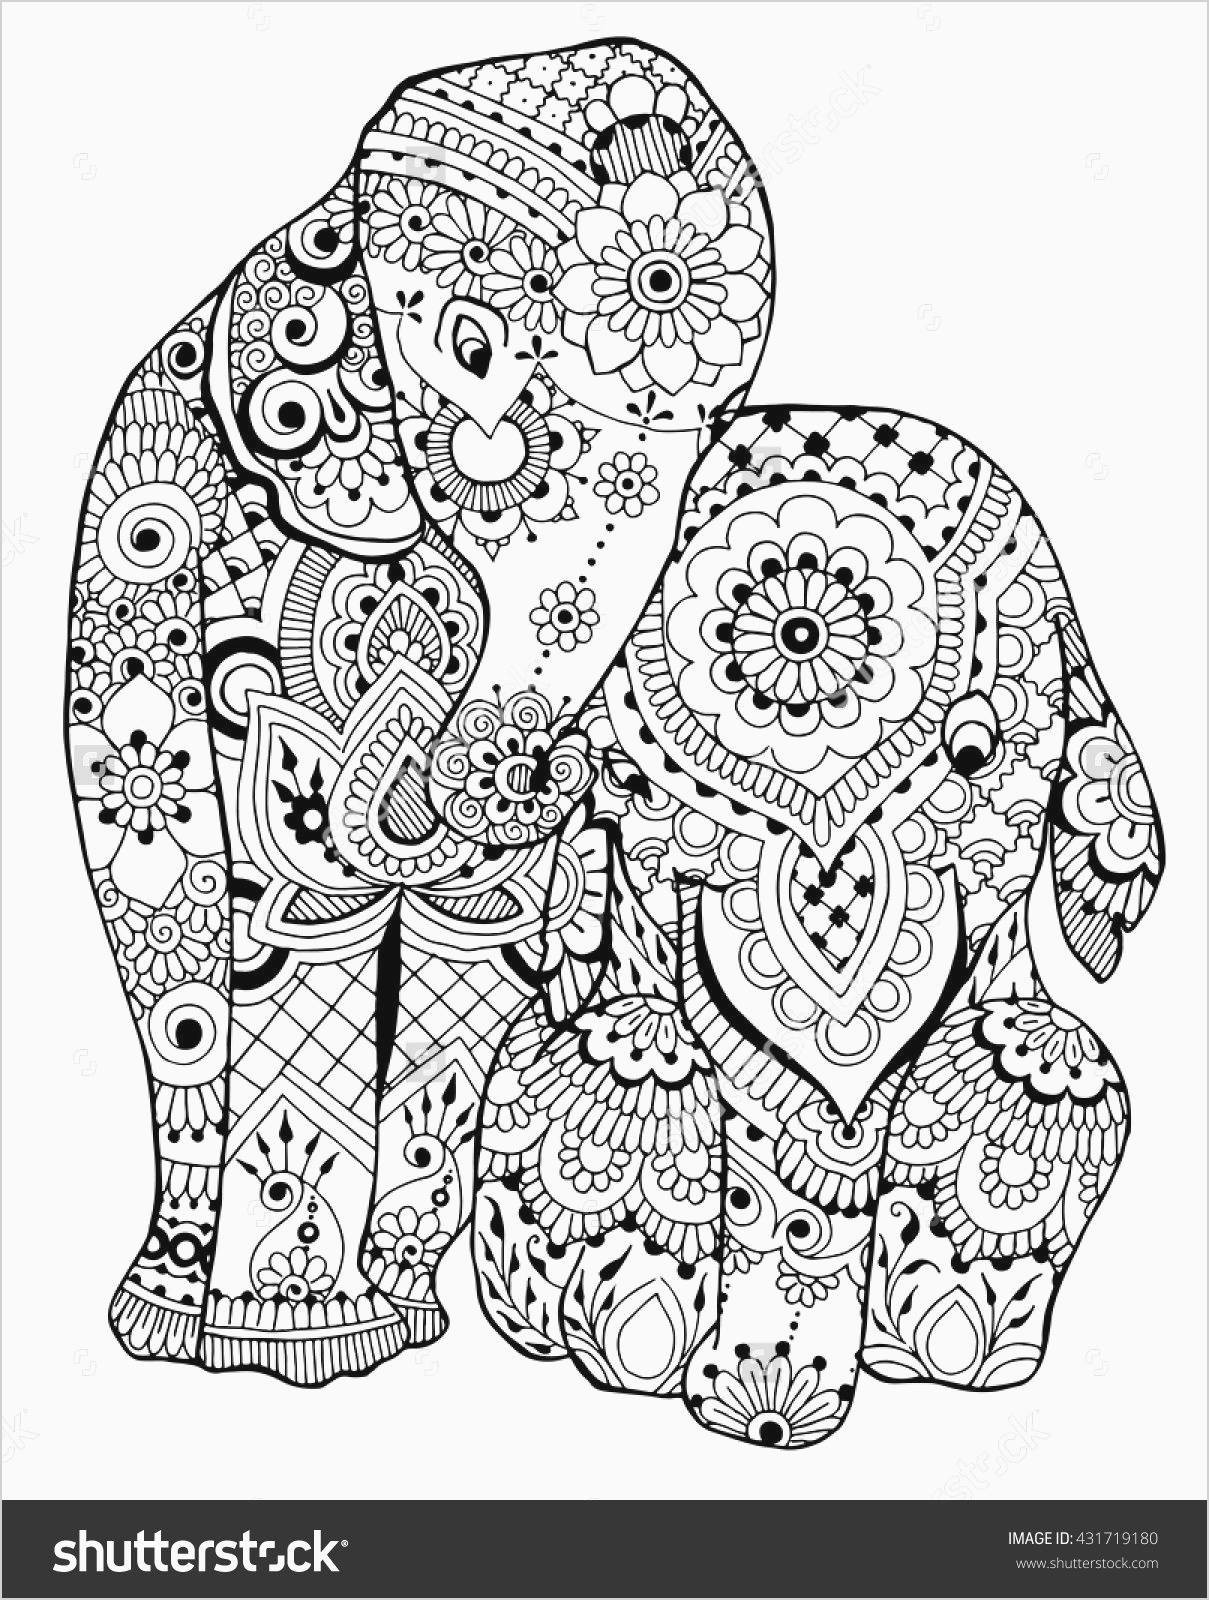 elephant coloring pages best color page new children colouring 0d 2